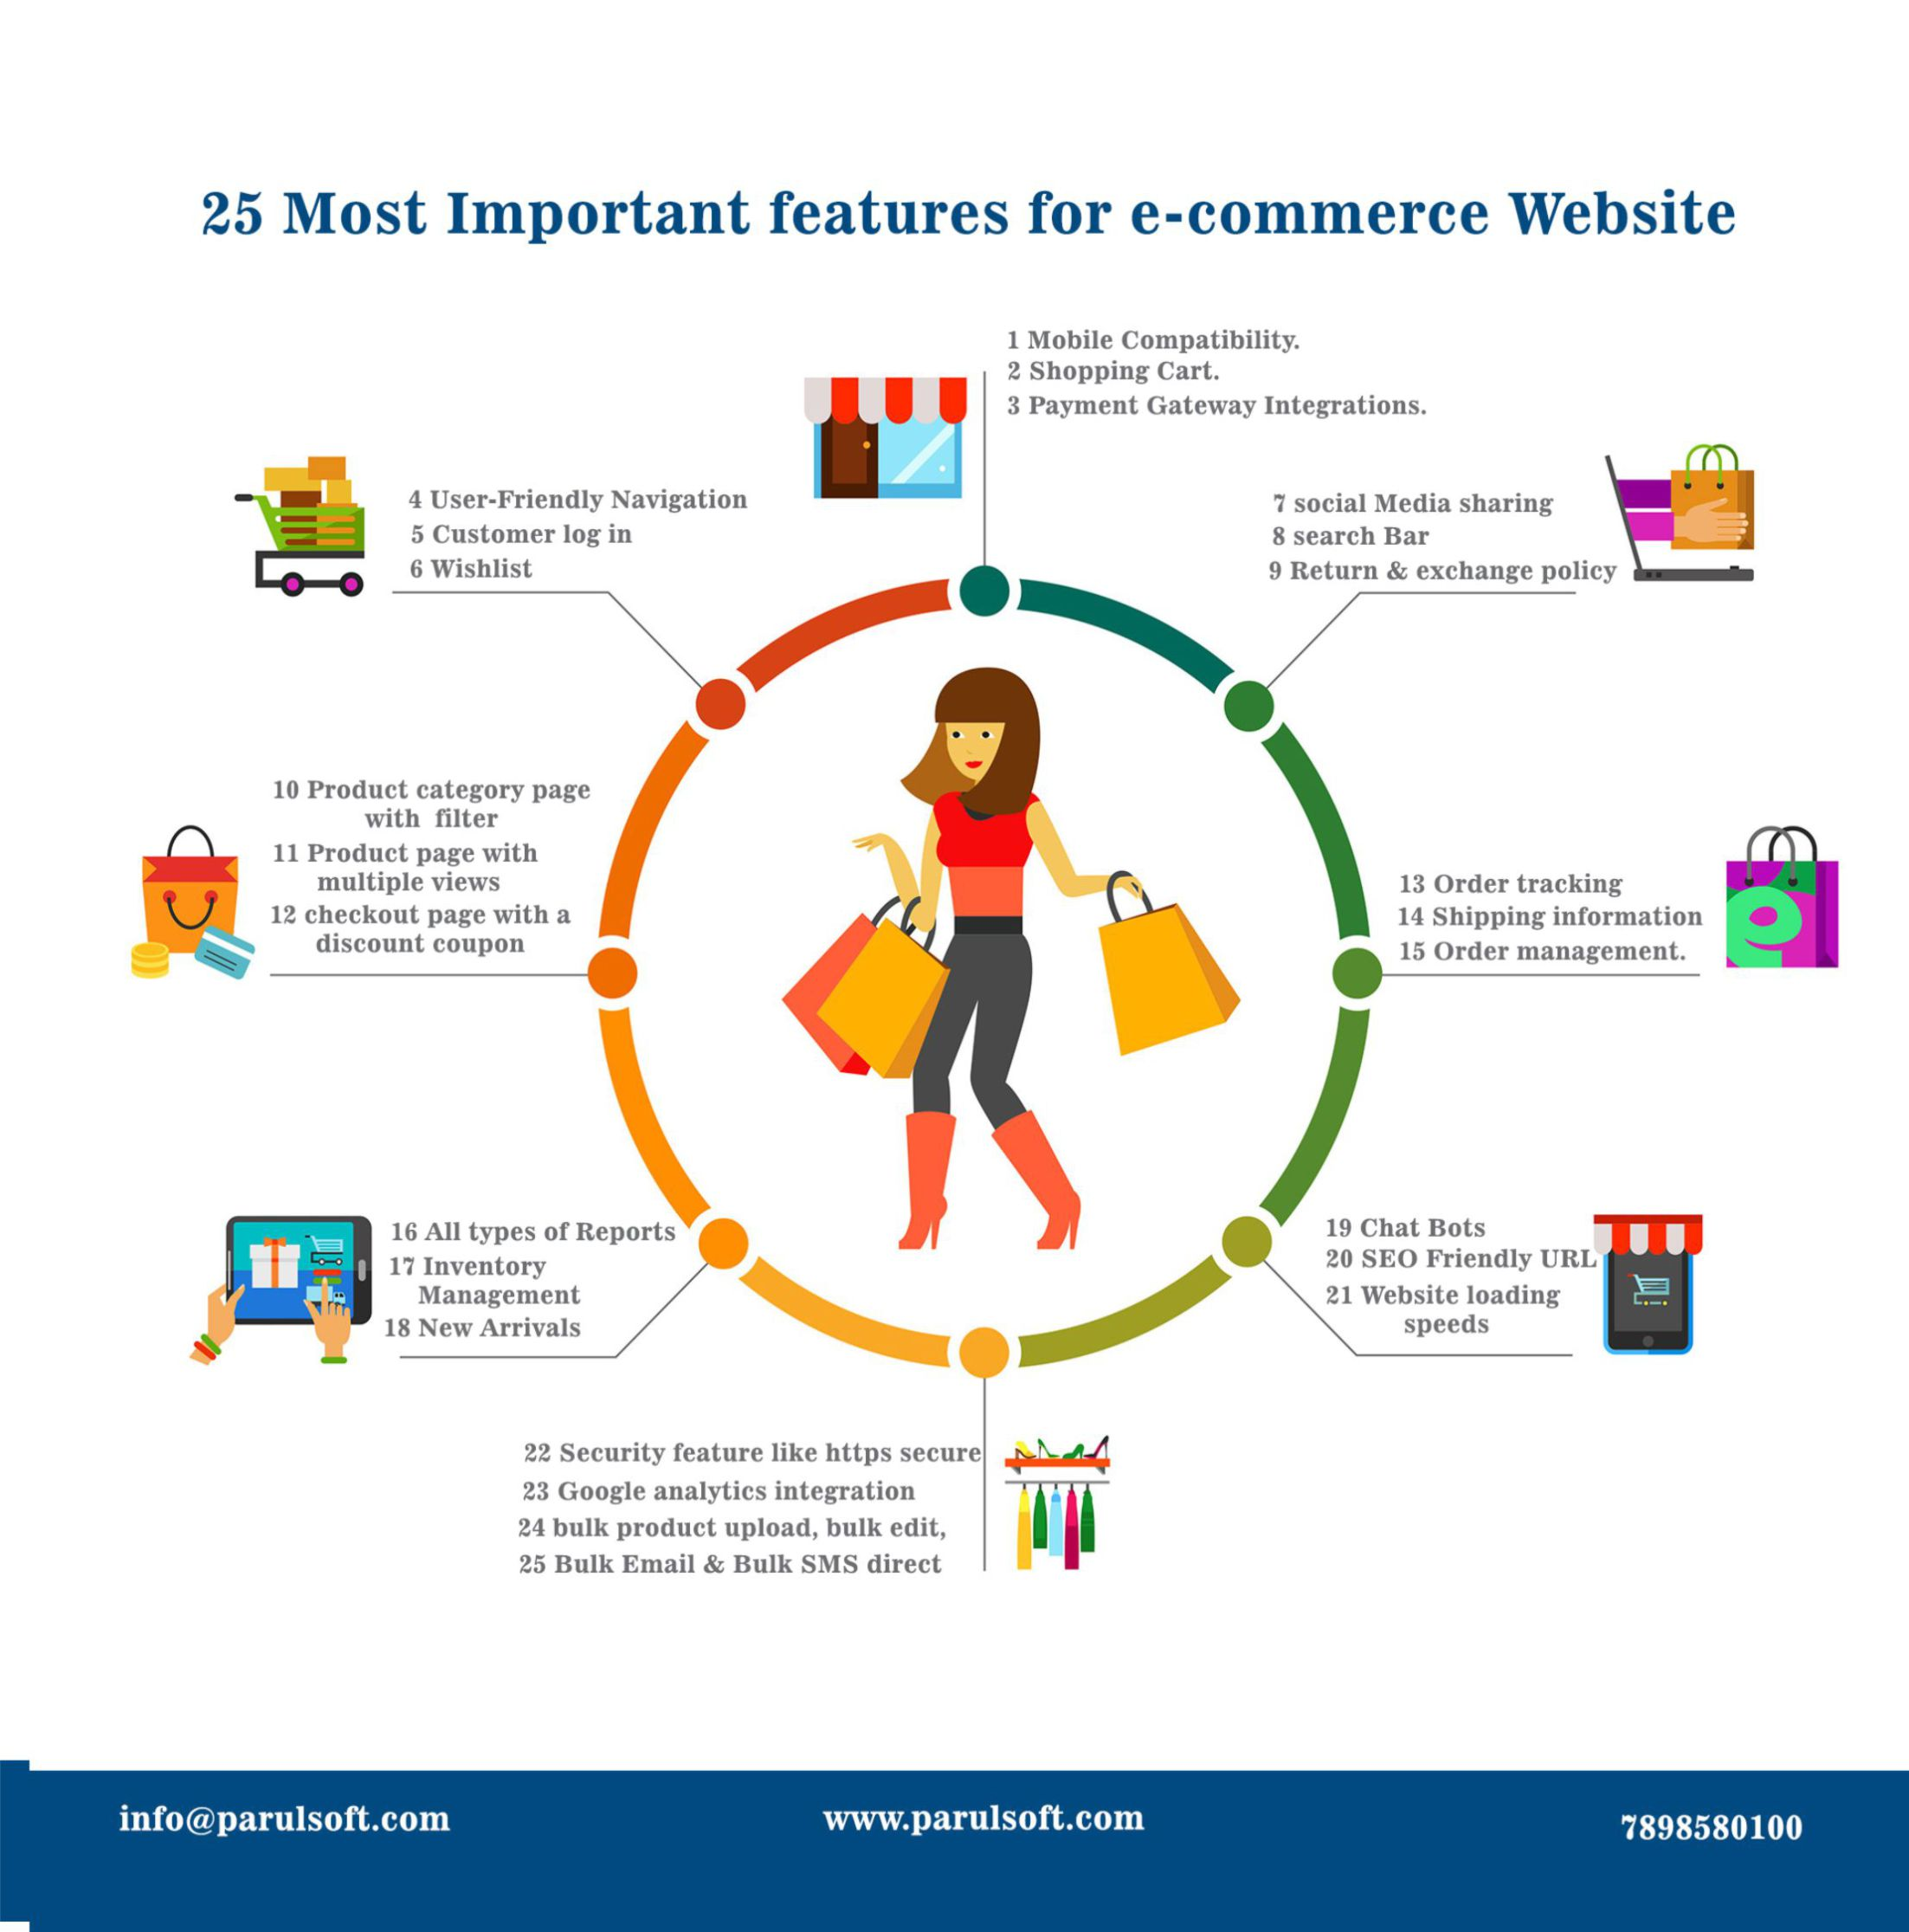 6 Essential Components of an E-commerce Website 